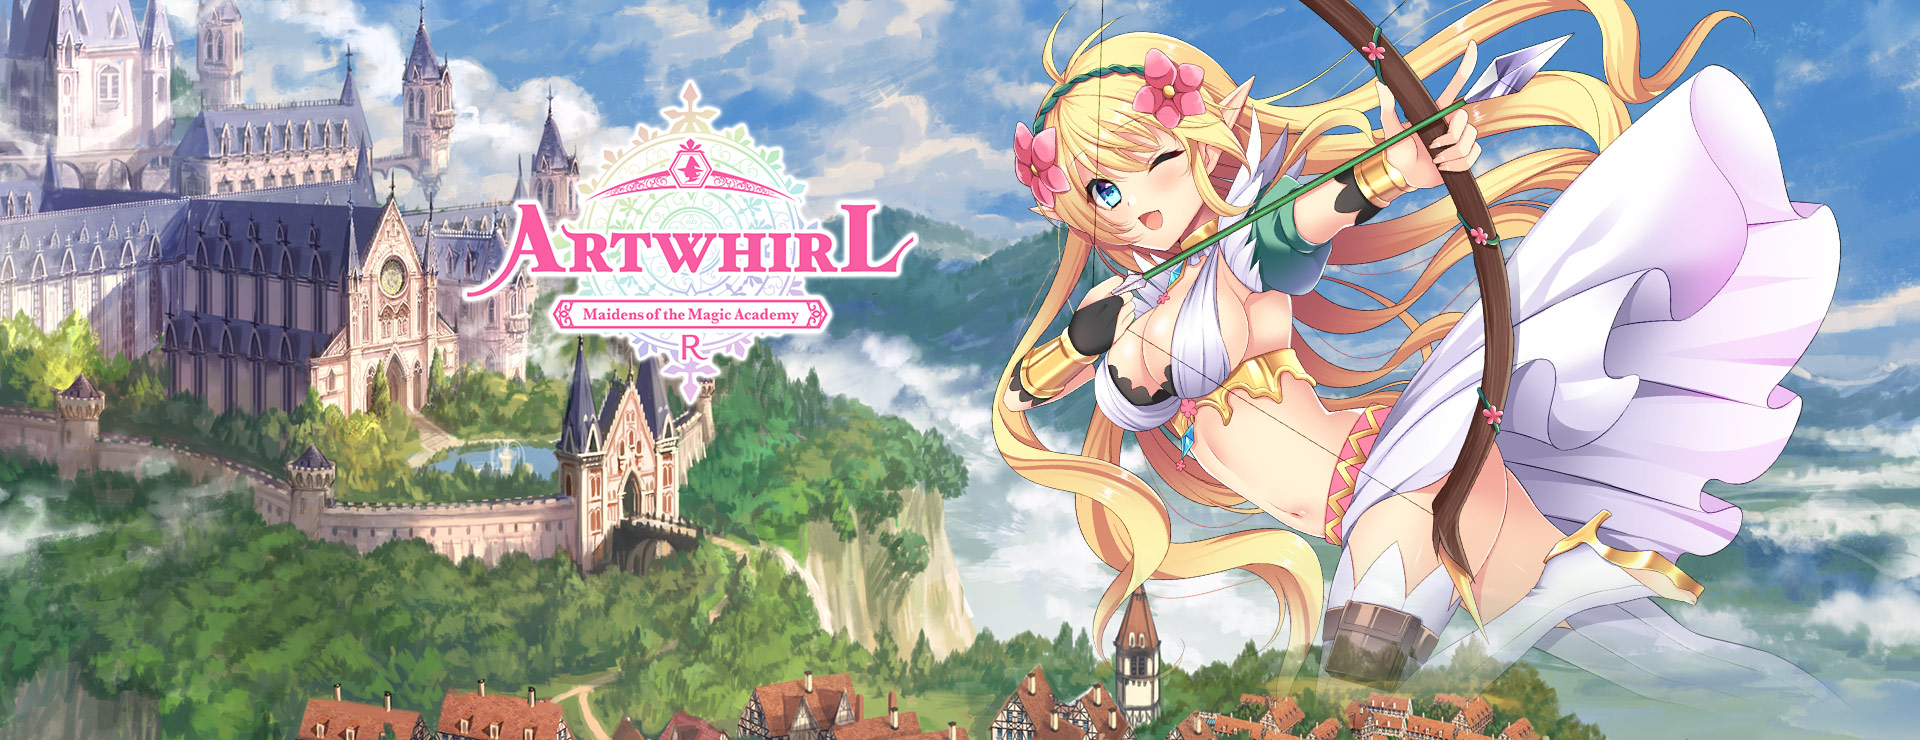 Artwhirl -Maidens of the Magic Academy- R - RPG Game